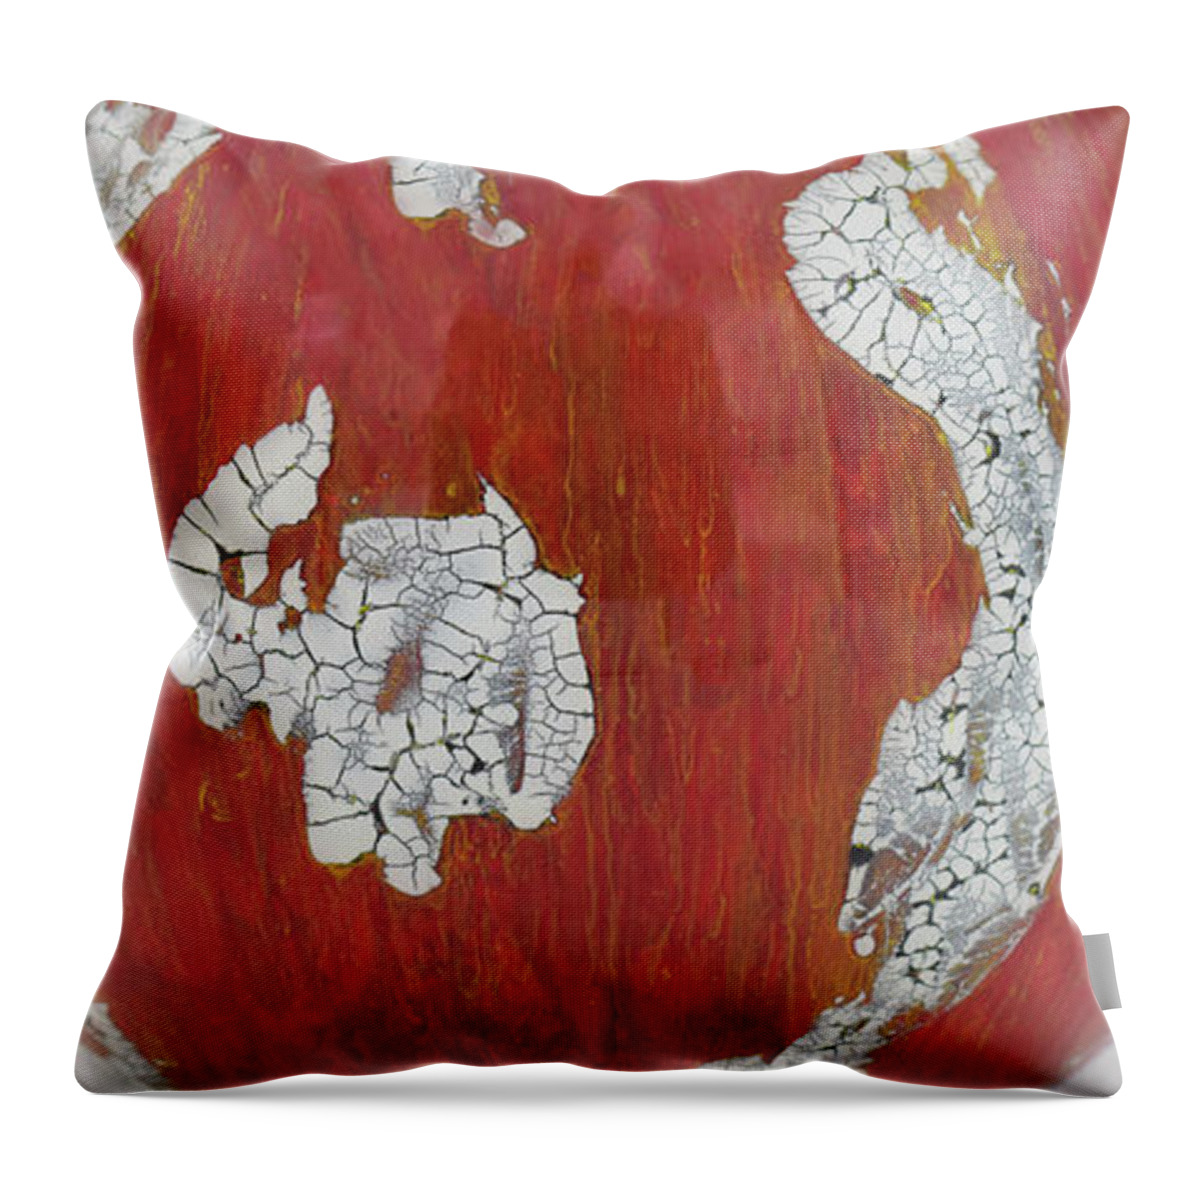 Red Throw Pillow featuring the glass art Large Red Bowl by Christopher Schranck